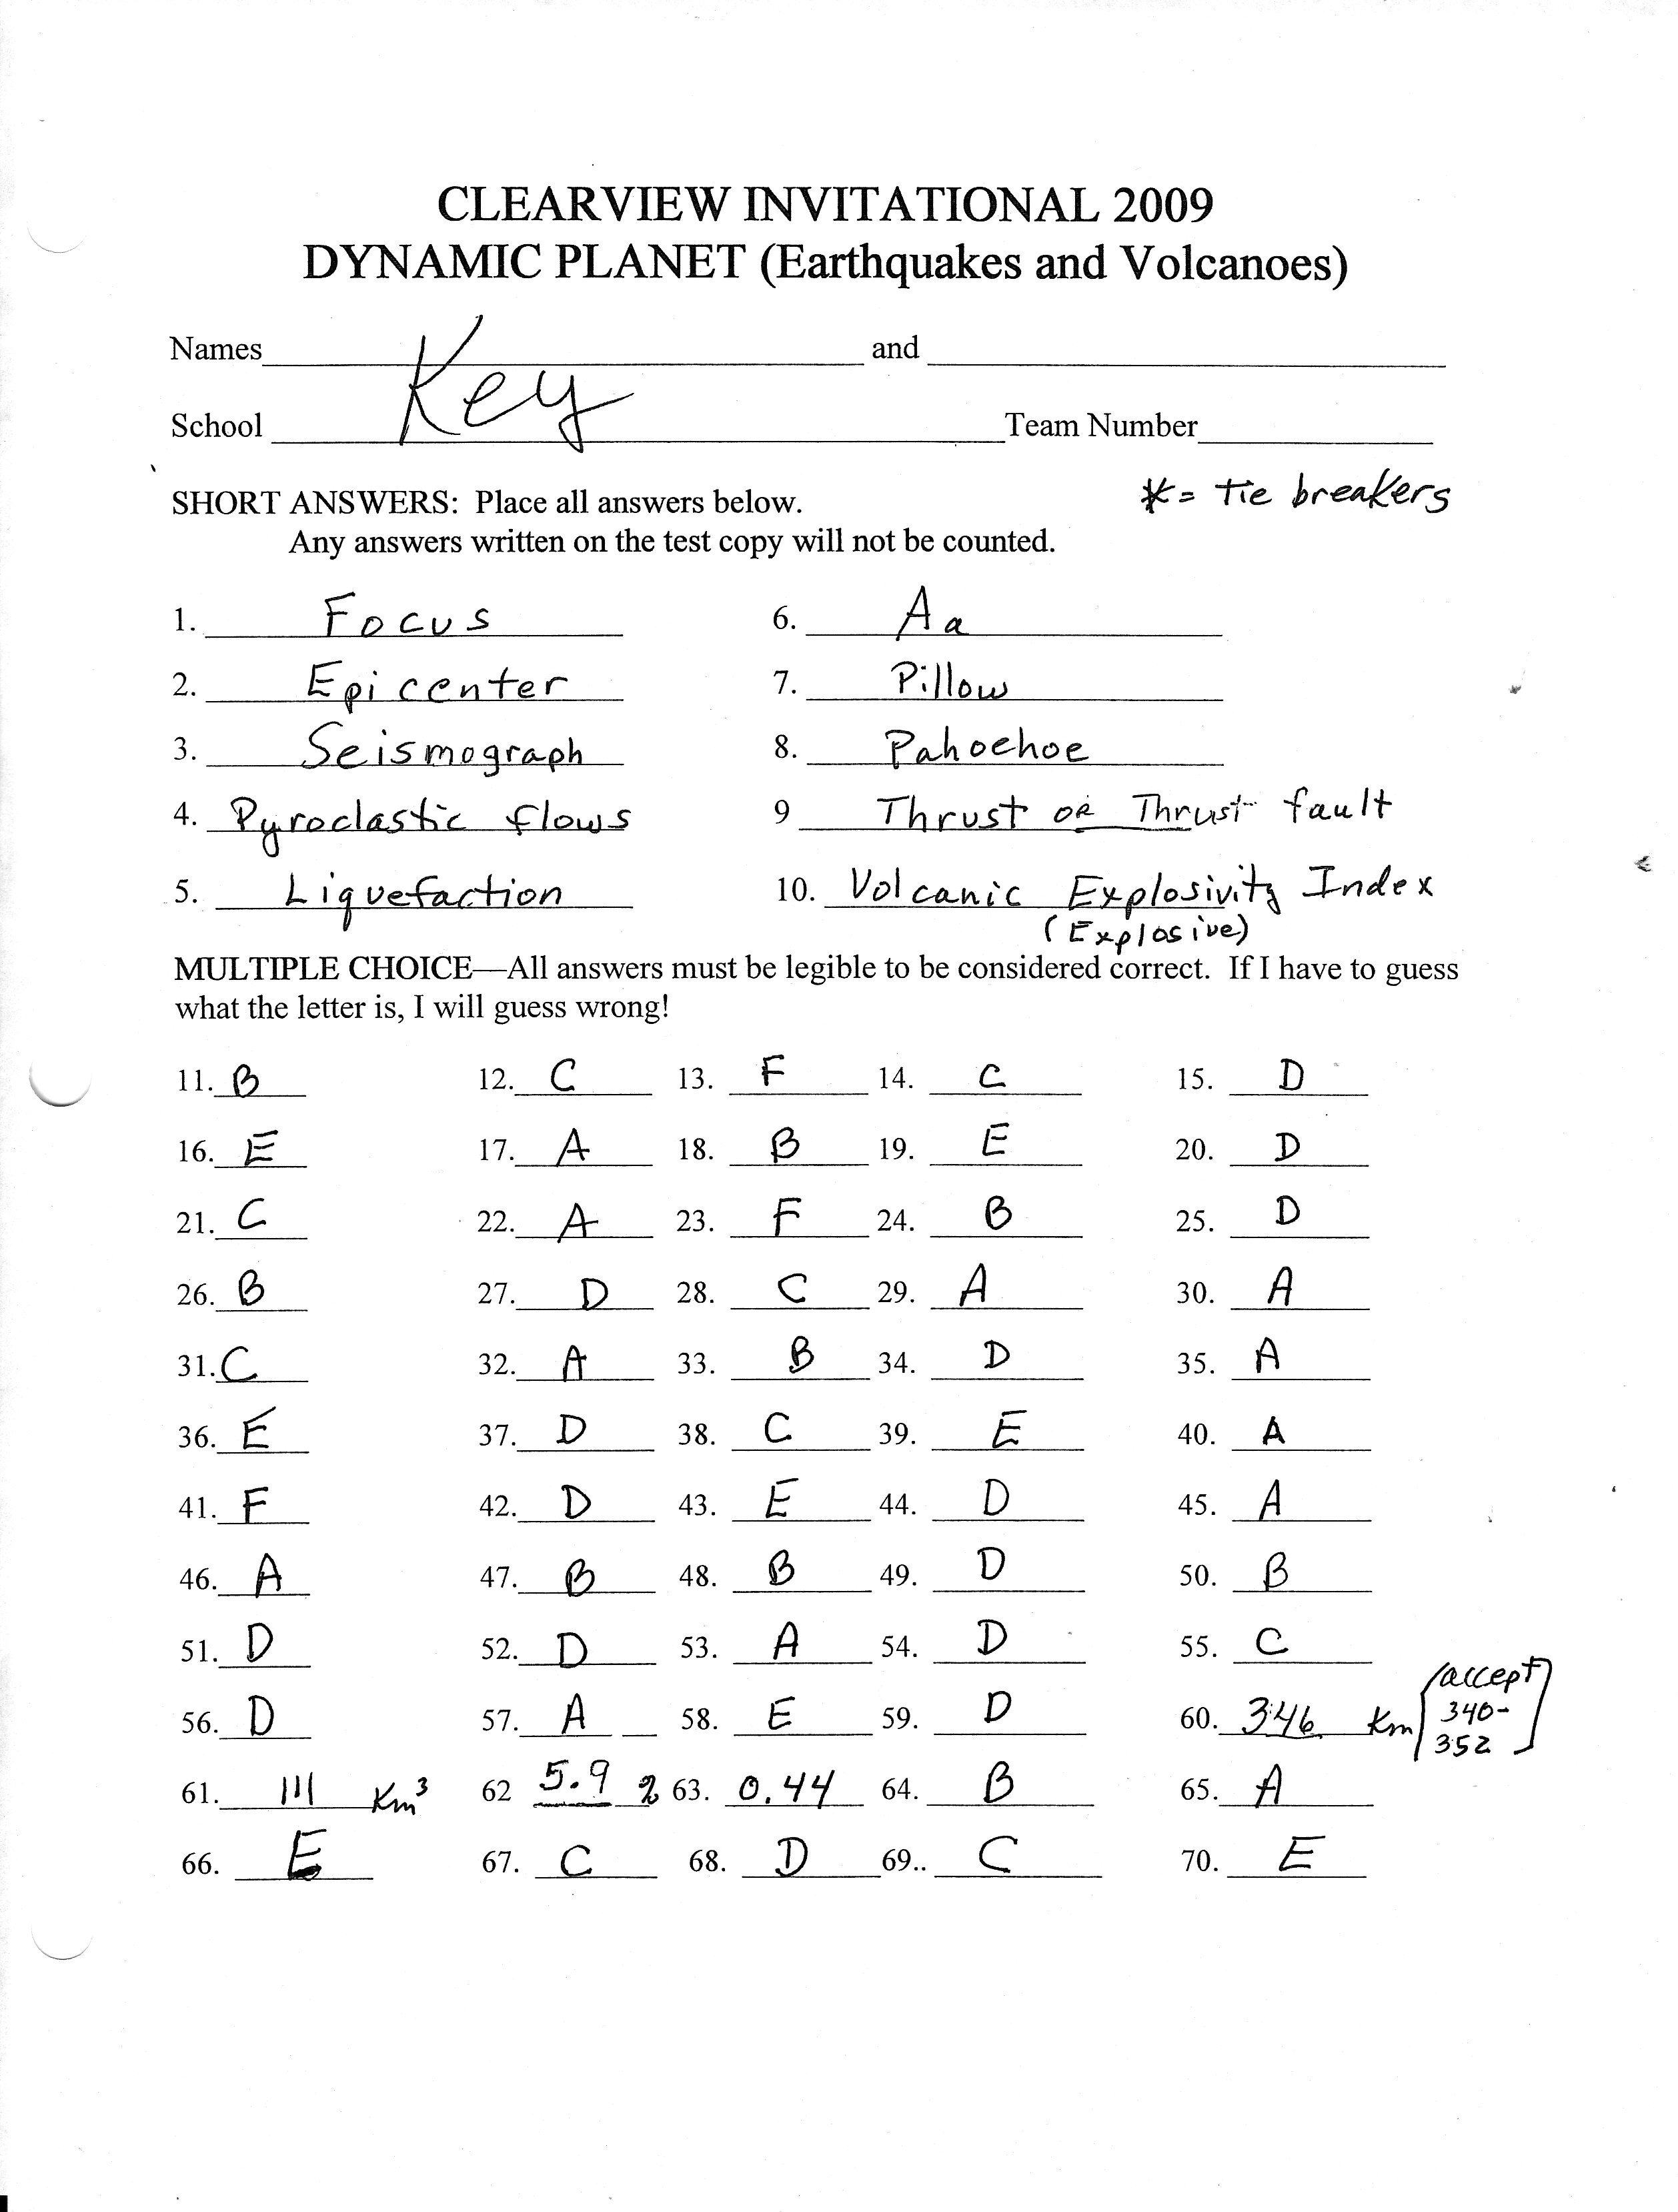 Science Test Answer Sheet Image